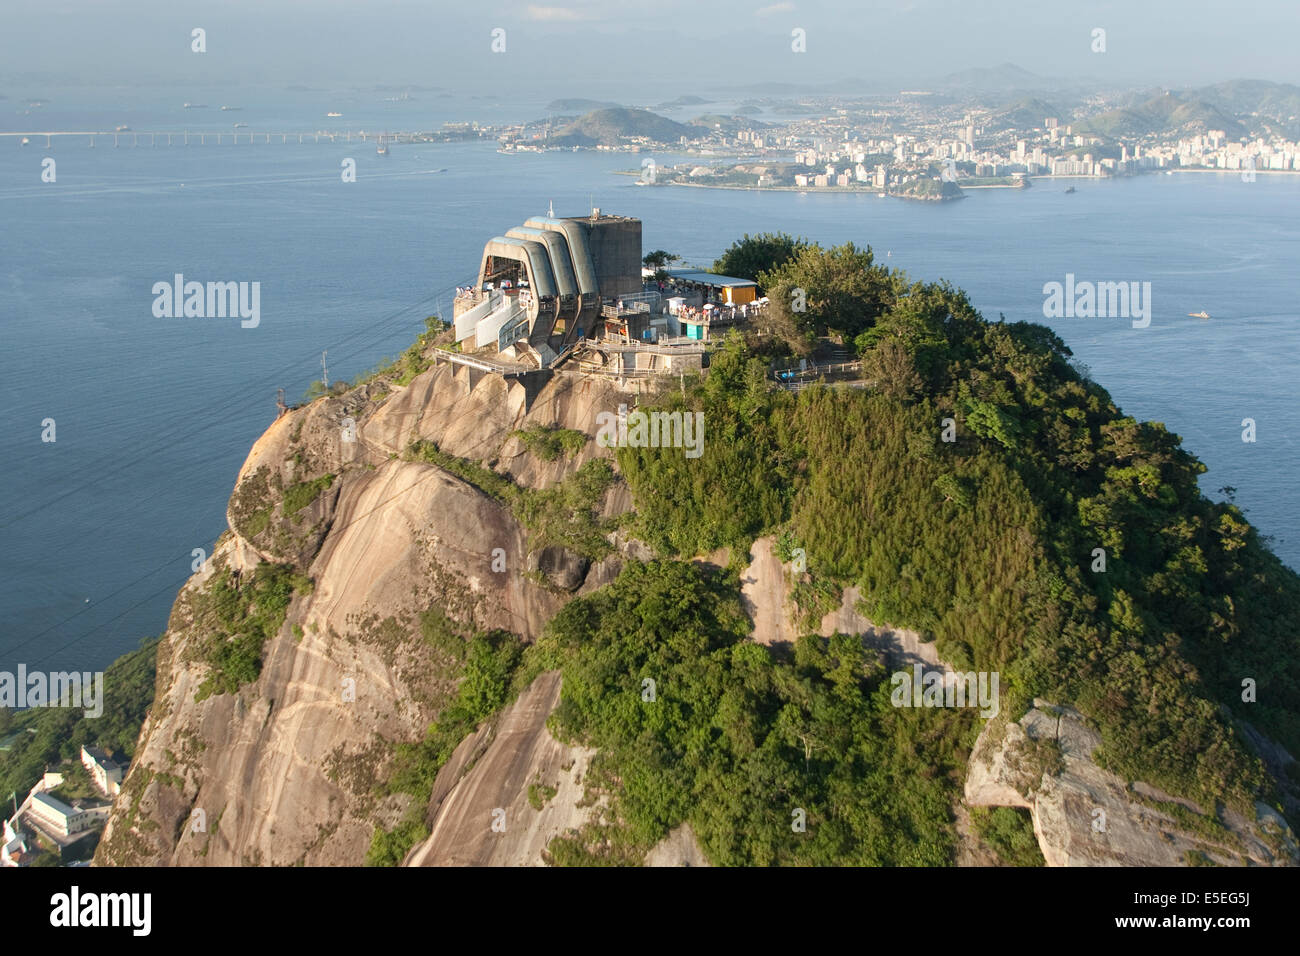 Aerial view of the cable car station on Sugar Loaf mountain with Guanabara Bay and Niteroi in the distanc Rio de Janeiro, Brazil Stock Photo